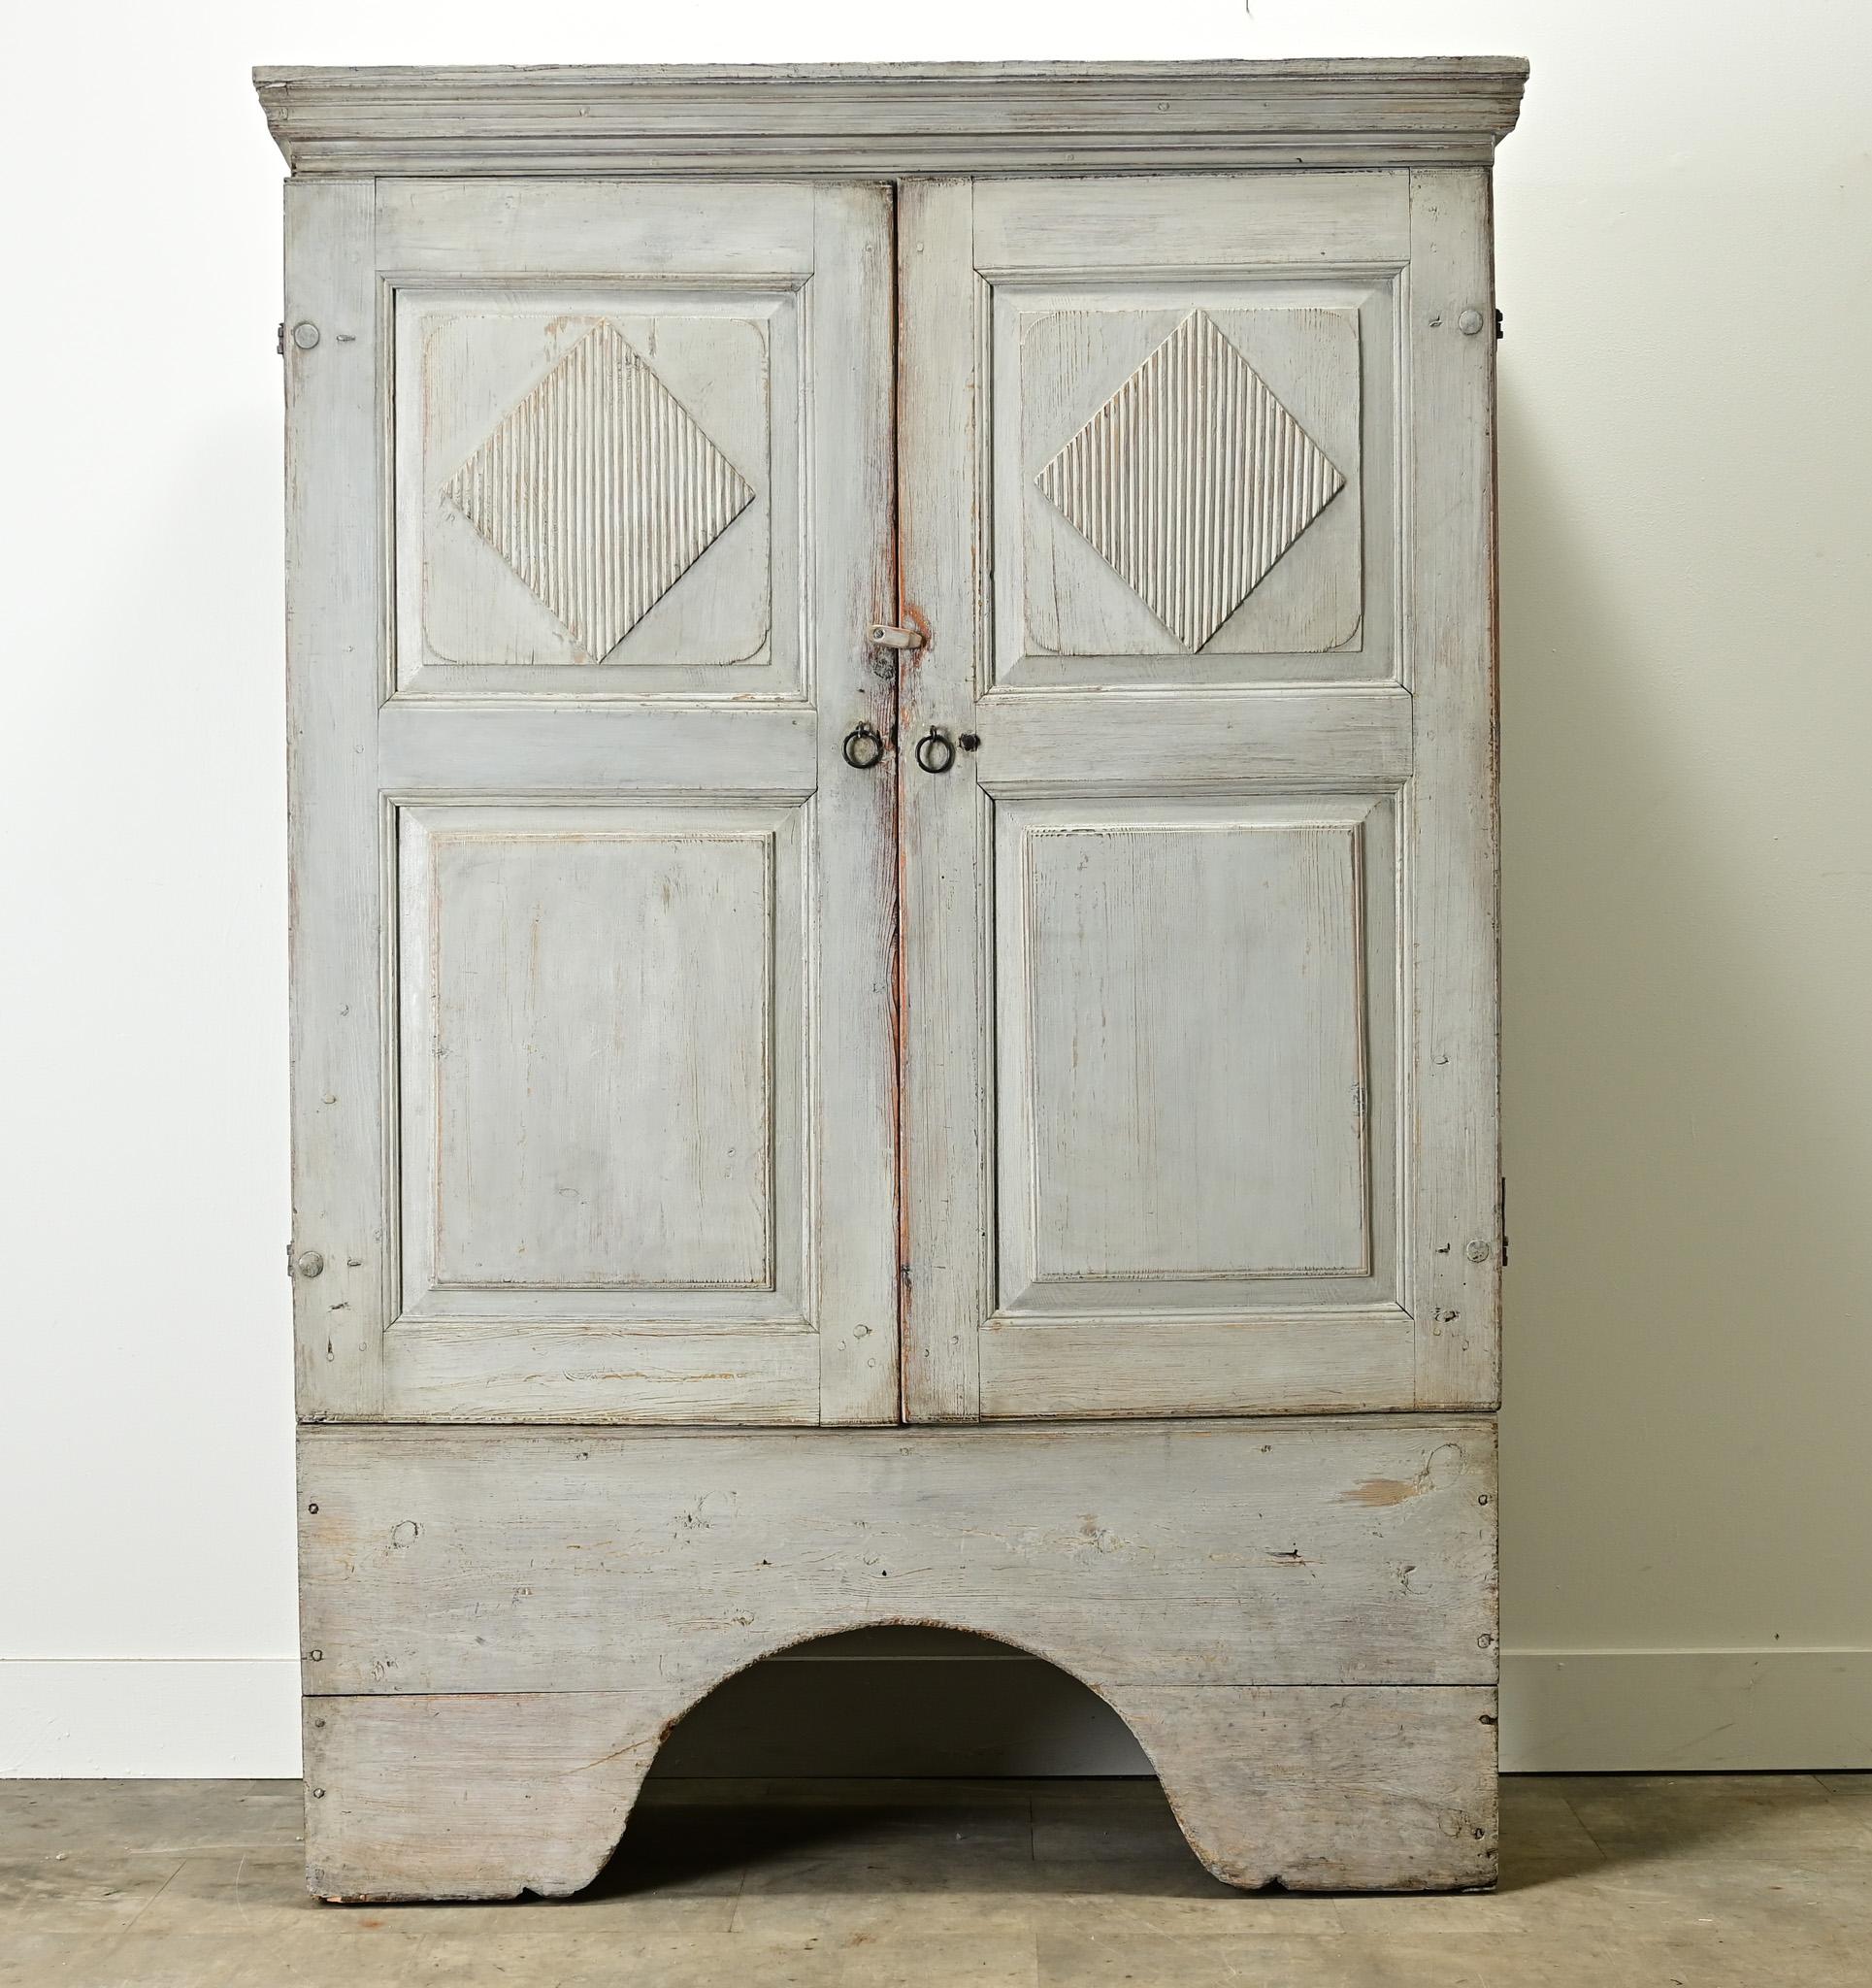 A painted Swedish Gustavian armoire from the late 1700’s. This solid pine cabinet has its original light gray-blue paint finish that is worn in all the right places. The tall paneled doors are carved with reeded diamond shape designs and open on